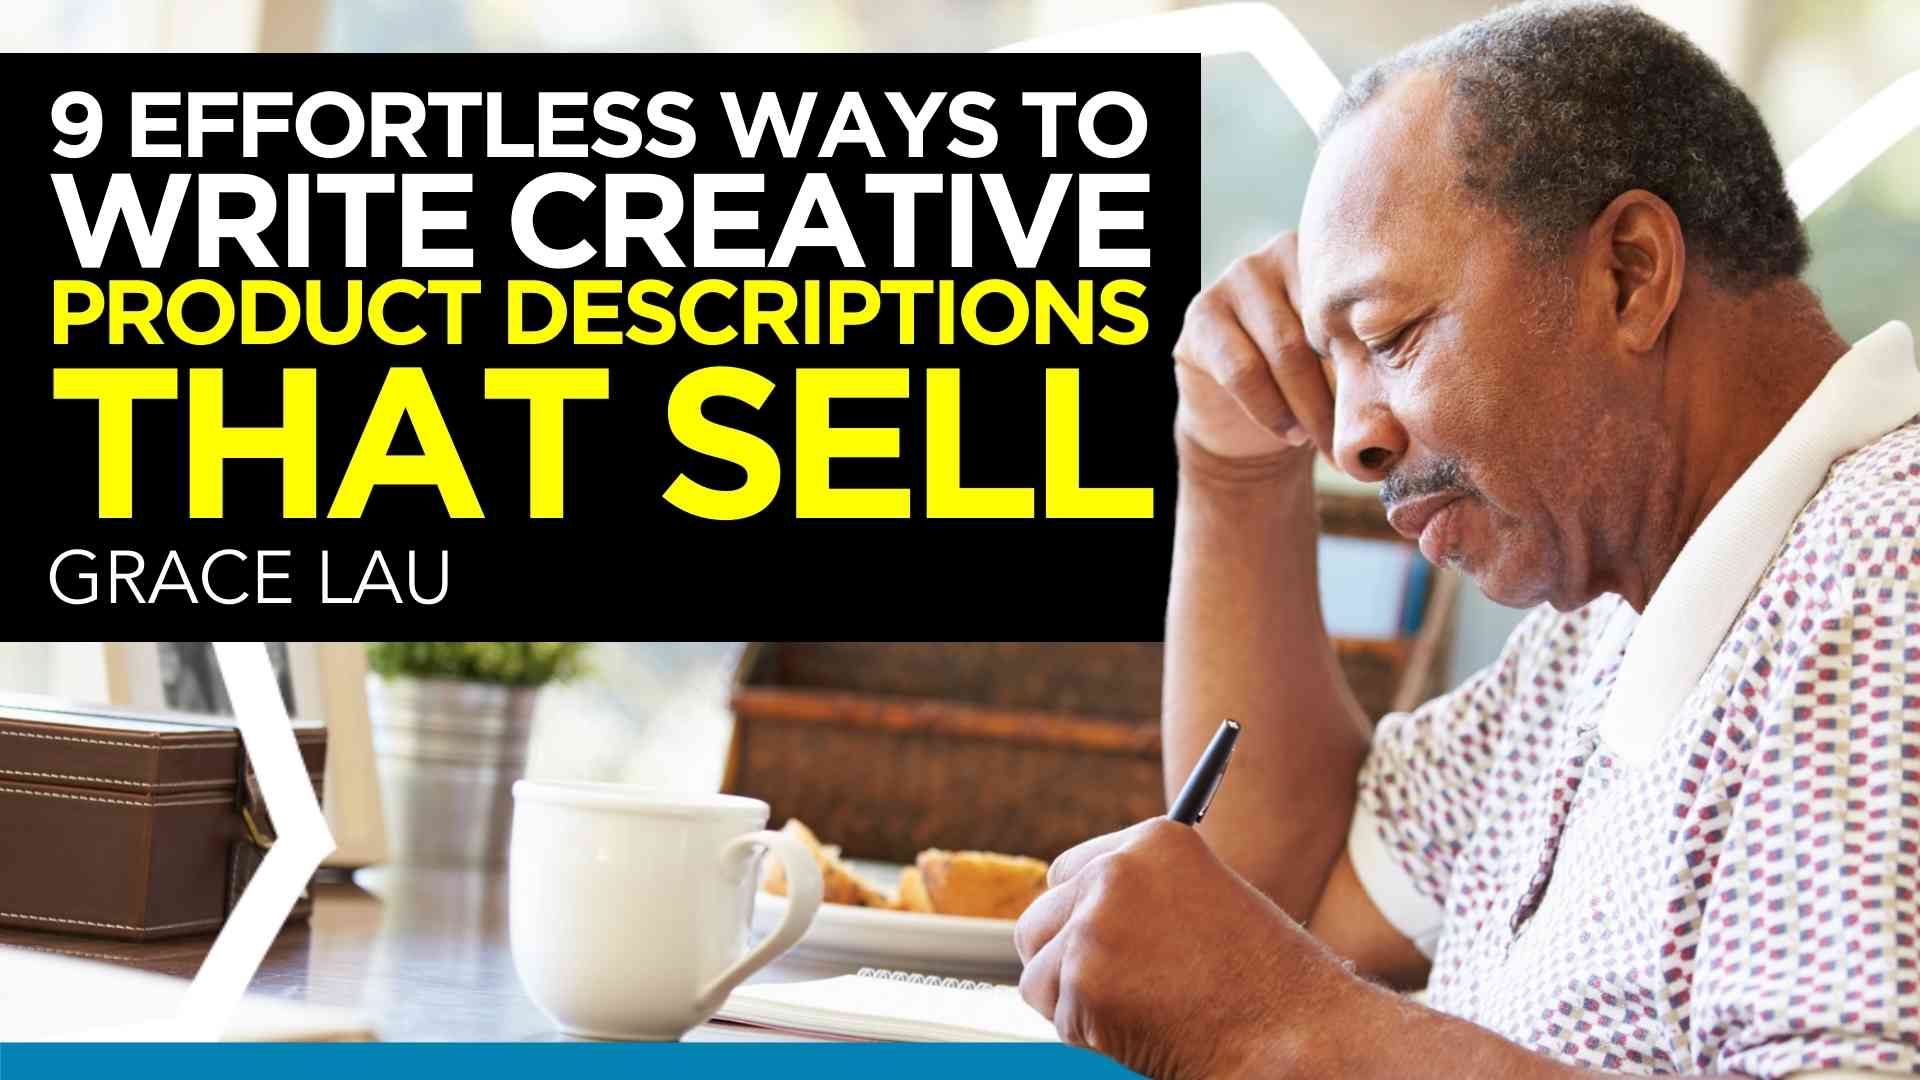 9 Effortless Ways to Write Creative Product Descriptions That Sell